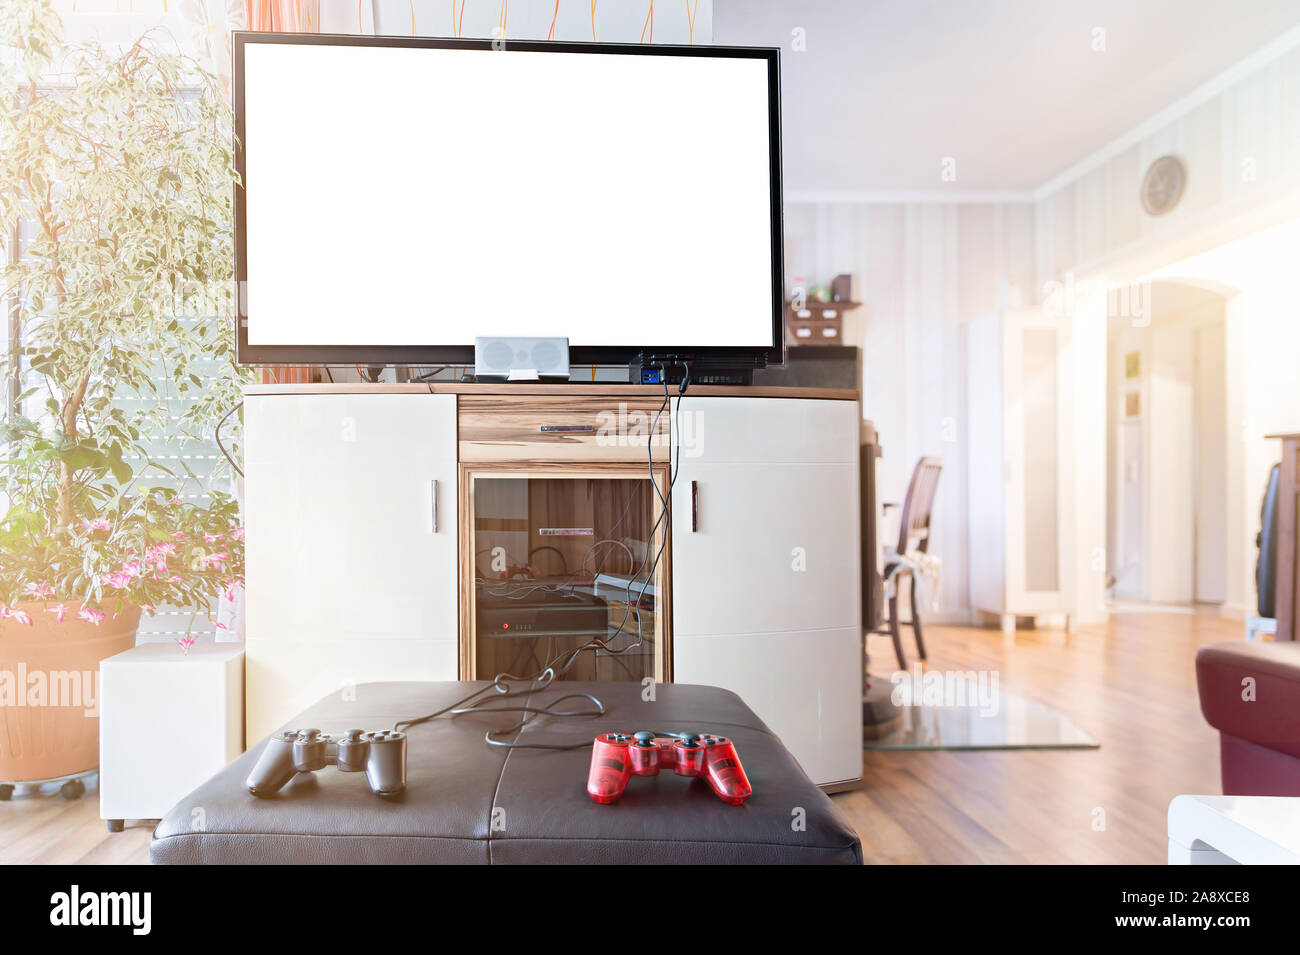 A widescreen TV with Copy Space. In the foreground are joysticks and a game console. Authentic home interior. Stock Photo